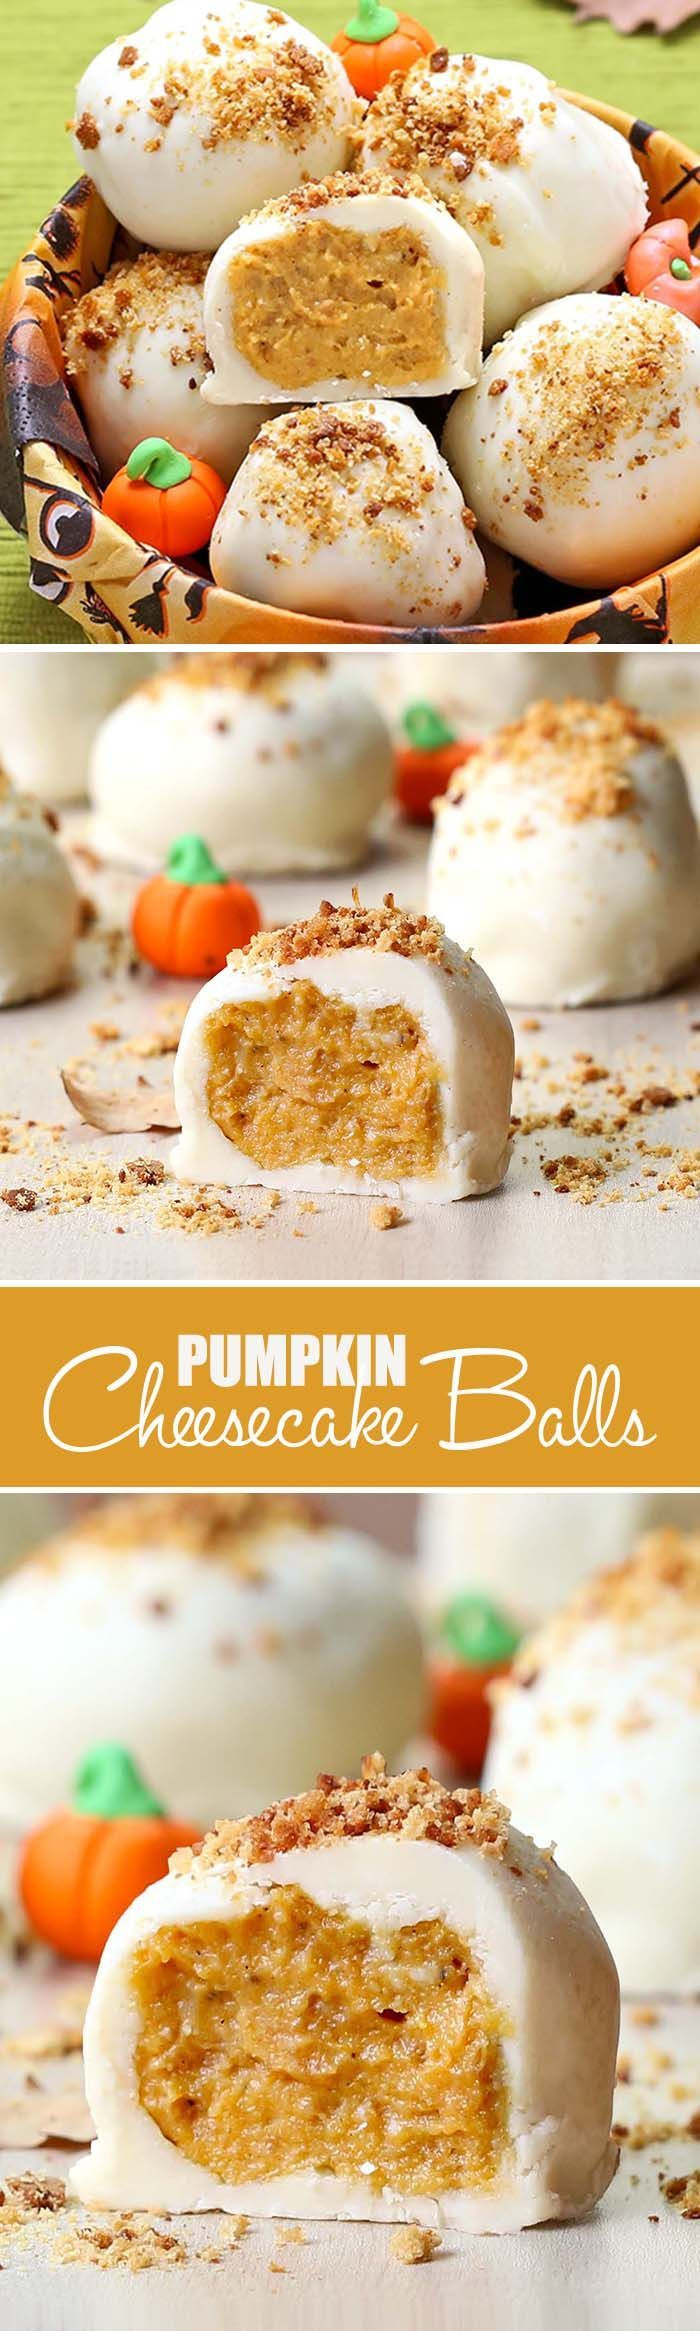 Fall Flavors For Desserts
 All the Best Fall Flavors in e Perfect Bite Pumpkin and